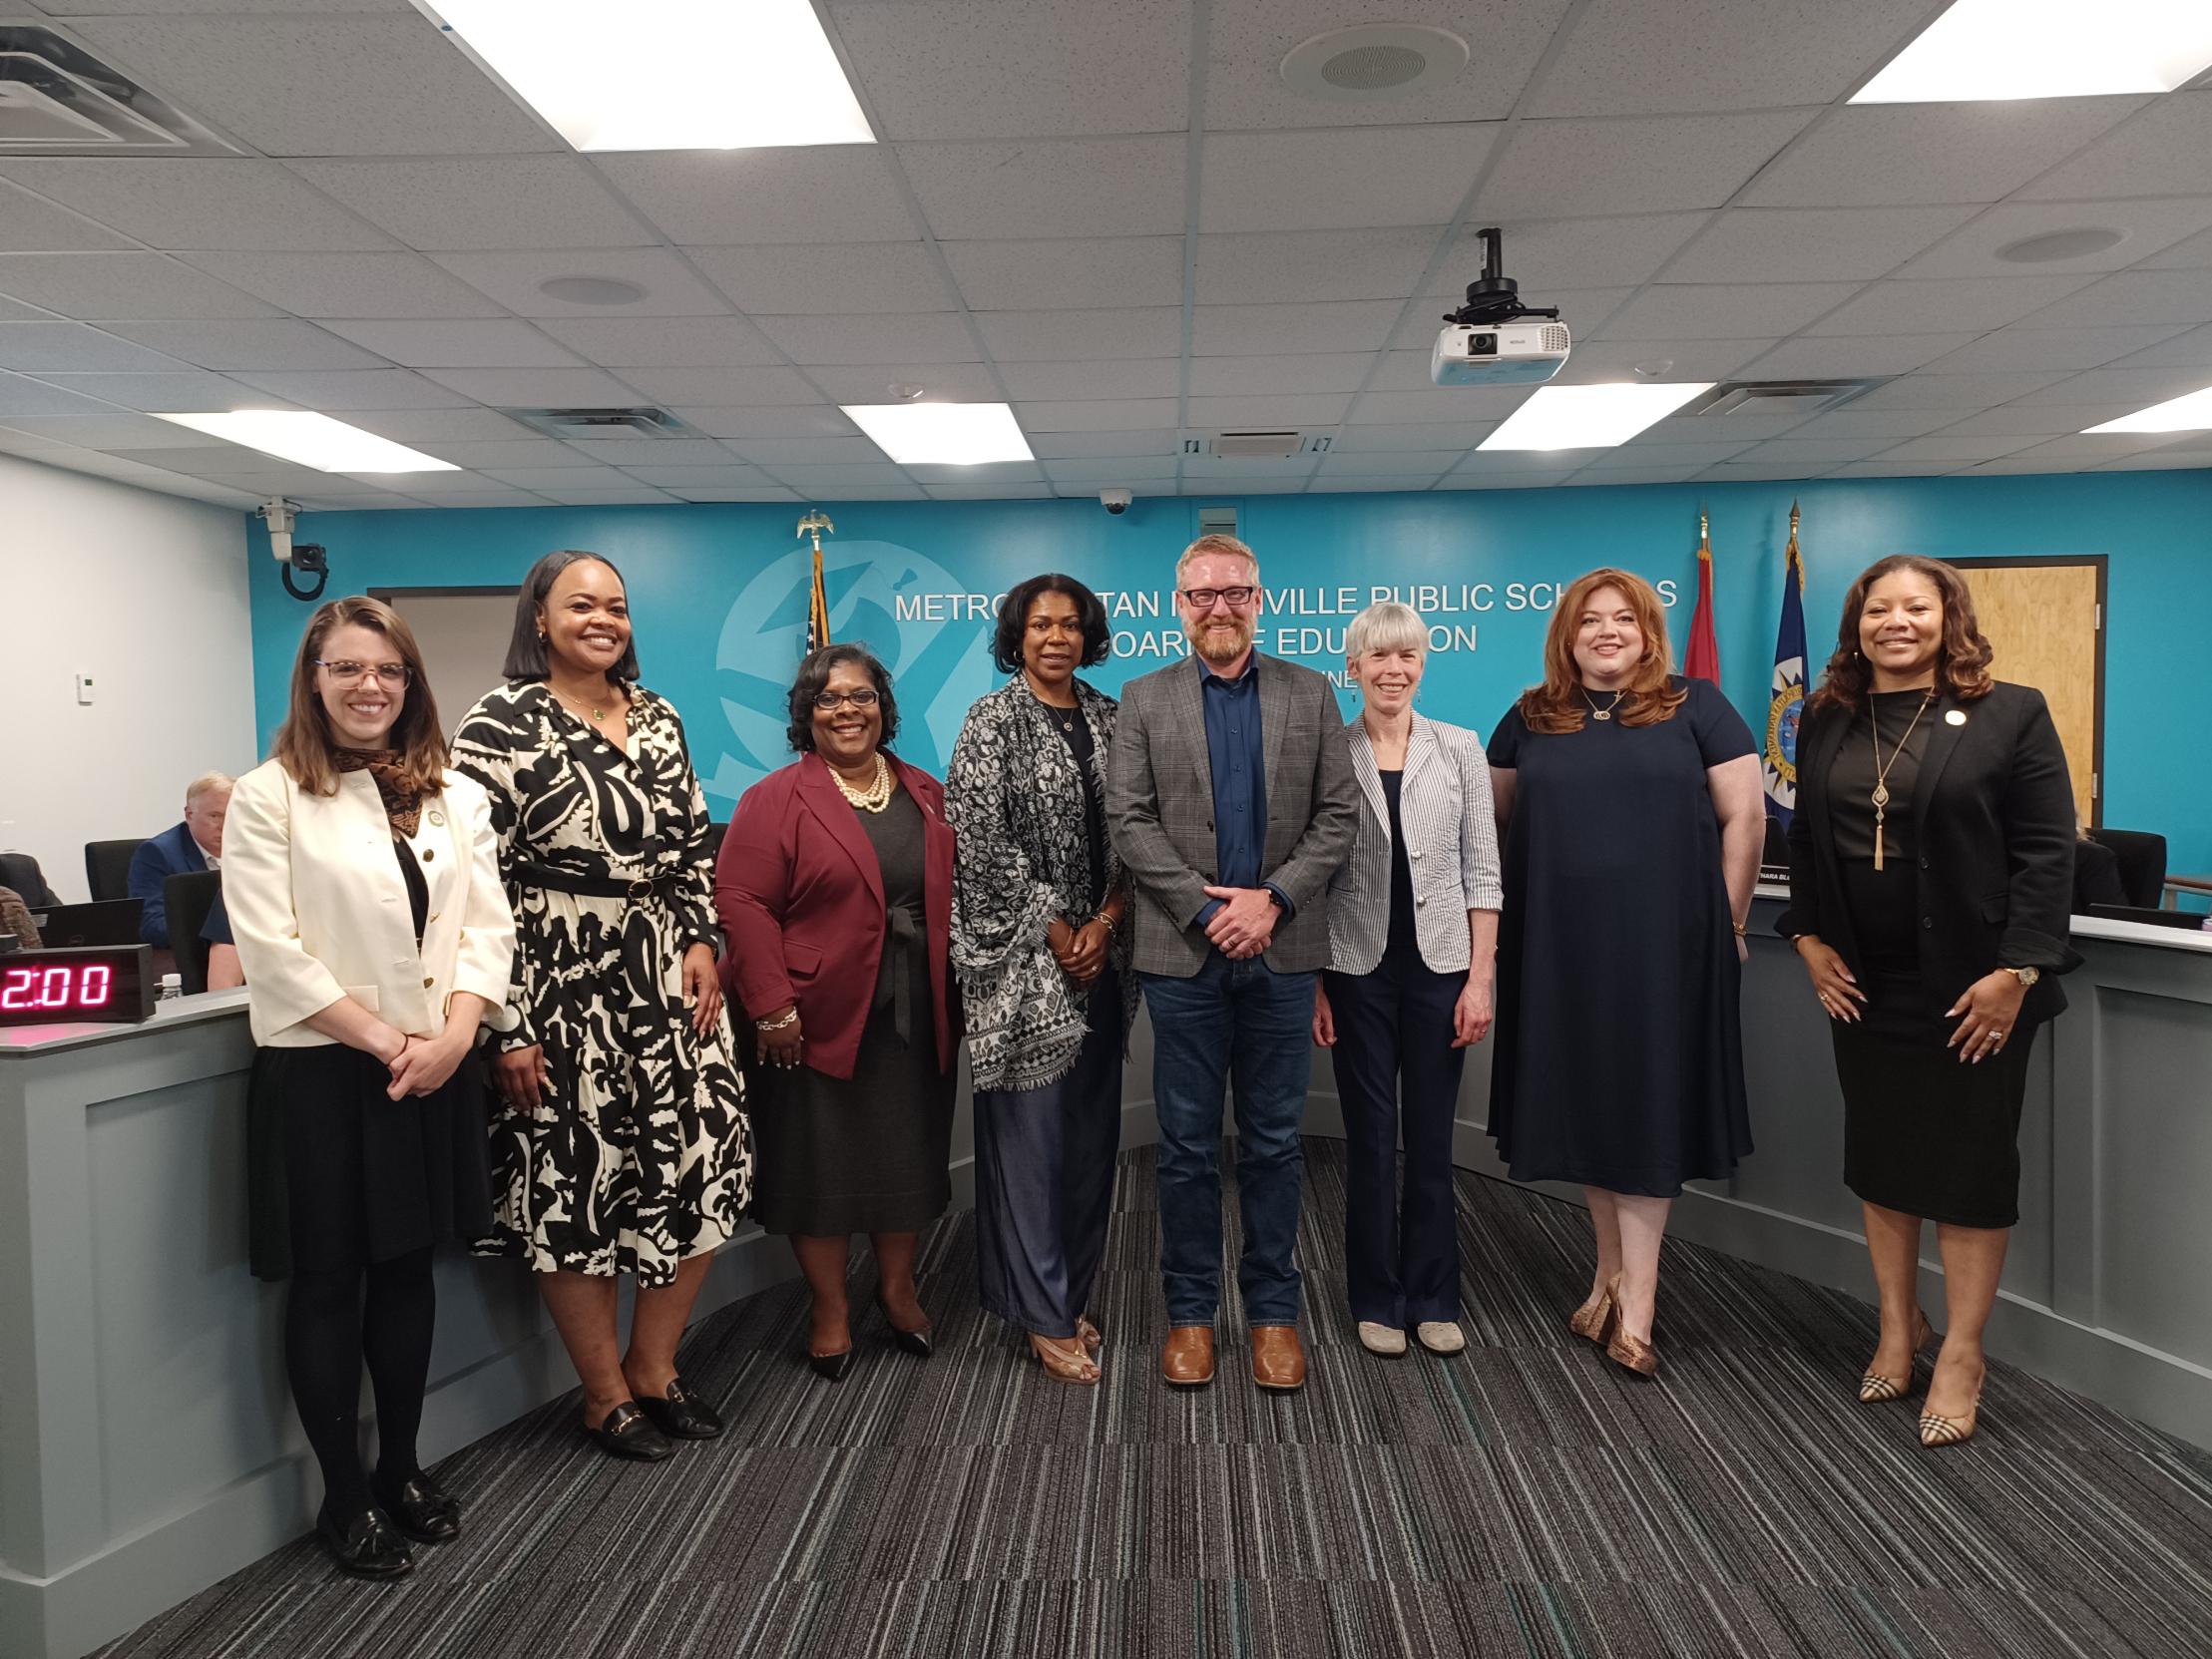 From left to right: Sarah Chin, chief strategy officer; TK Fayne, District 5 member; Renita Perry, chief of innovation; Sharon Gentry, District 1 member; Peabody College faculty members Andrew Hostetler and Marcy Singer-Gabella; Rachael Anne Elrod, Board chair and District 2 member; and Adrienne Battle, director of schools, photographed following the Board announcement on April 23